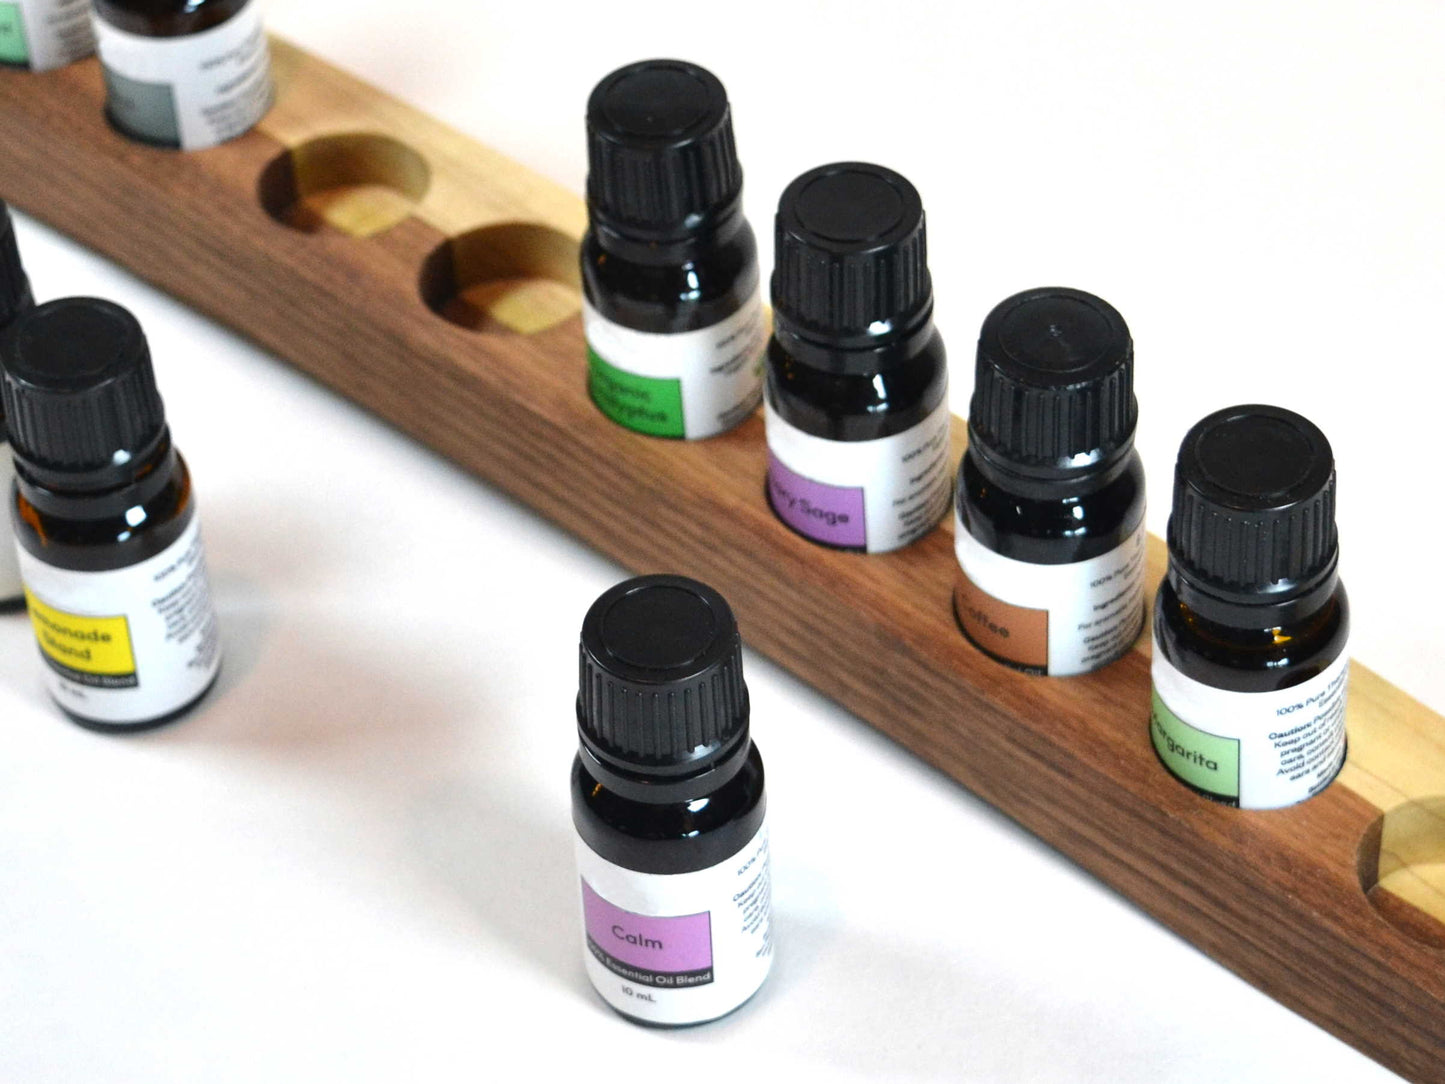 essential oil bottles with handcrafted wooden holder